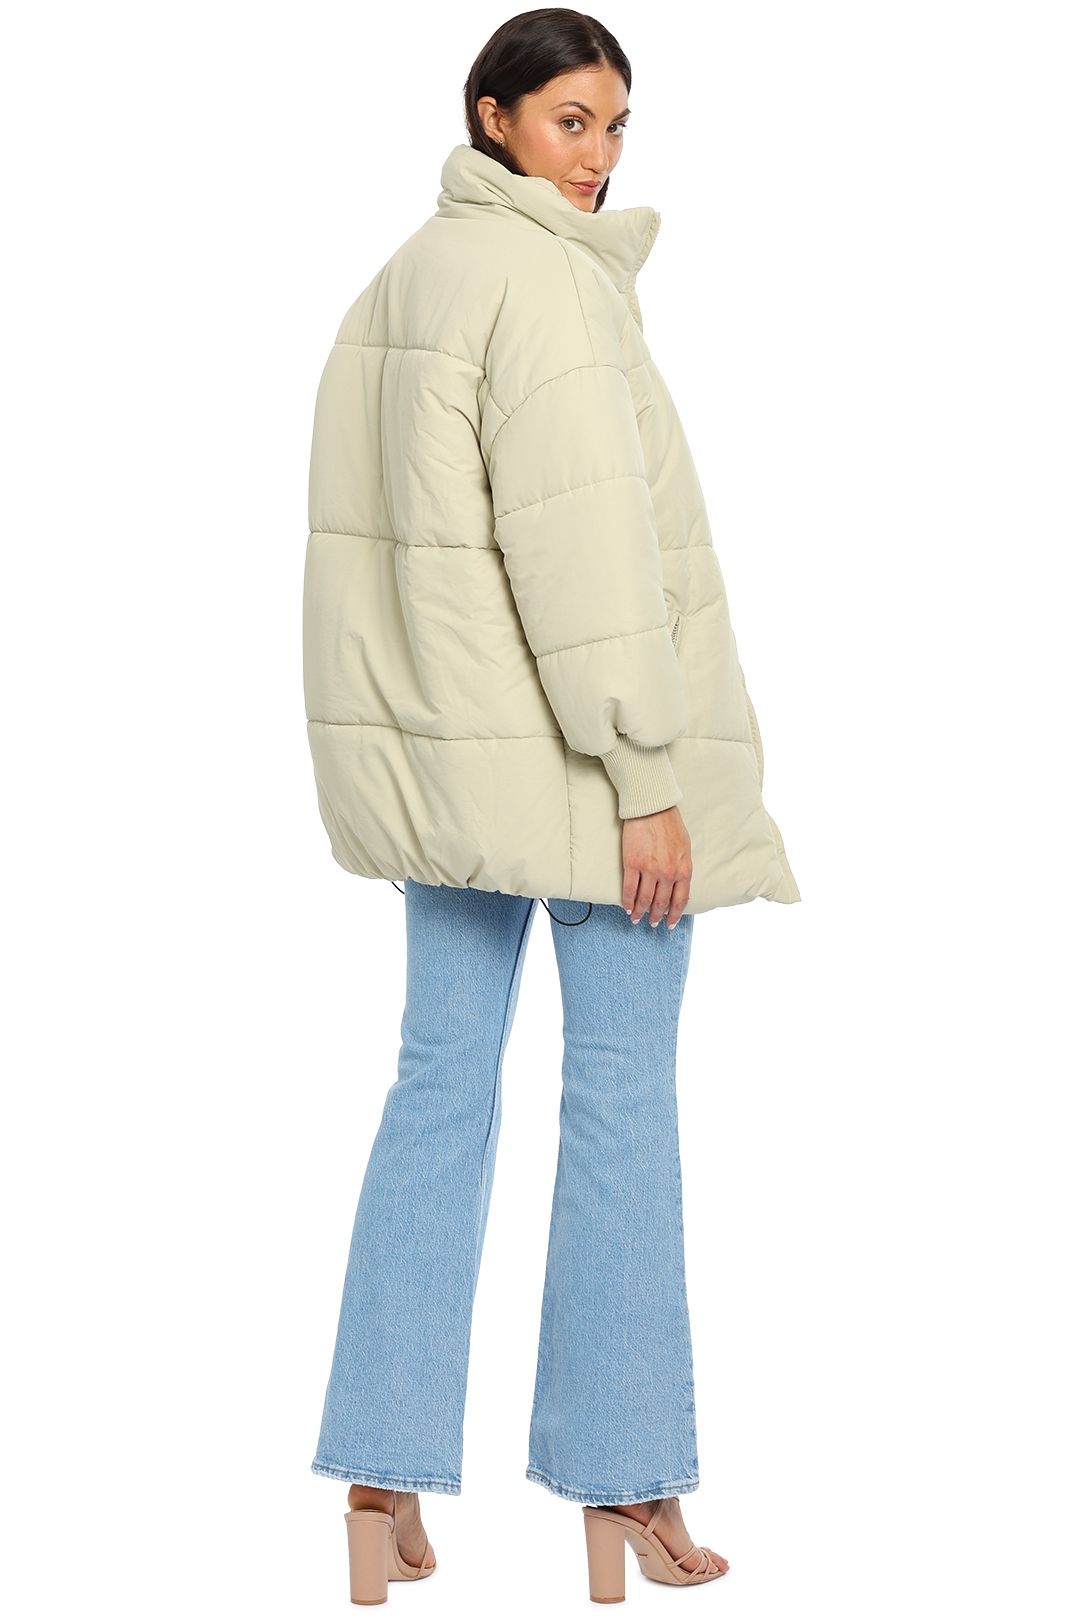 Charlie Holiday Zoey Oversized Puffer Jacket Long Line